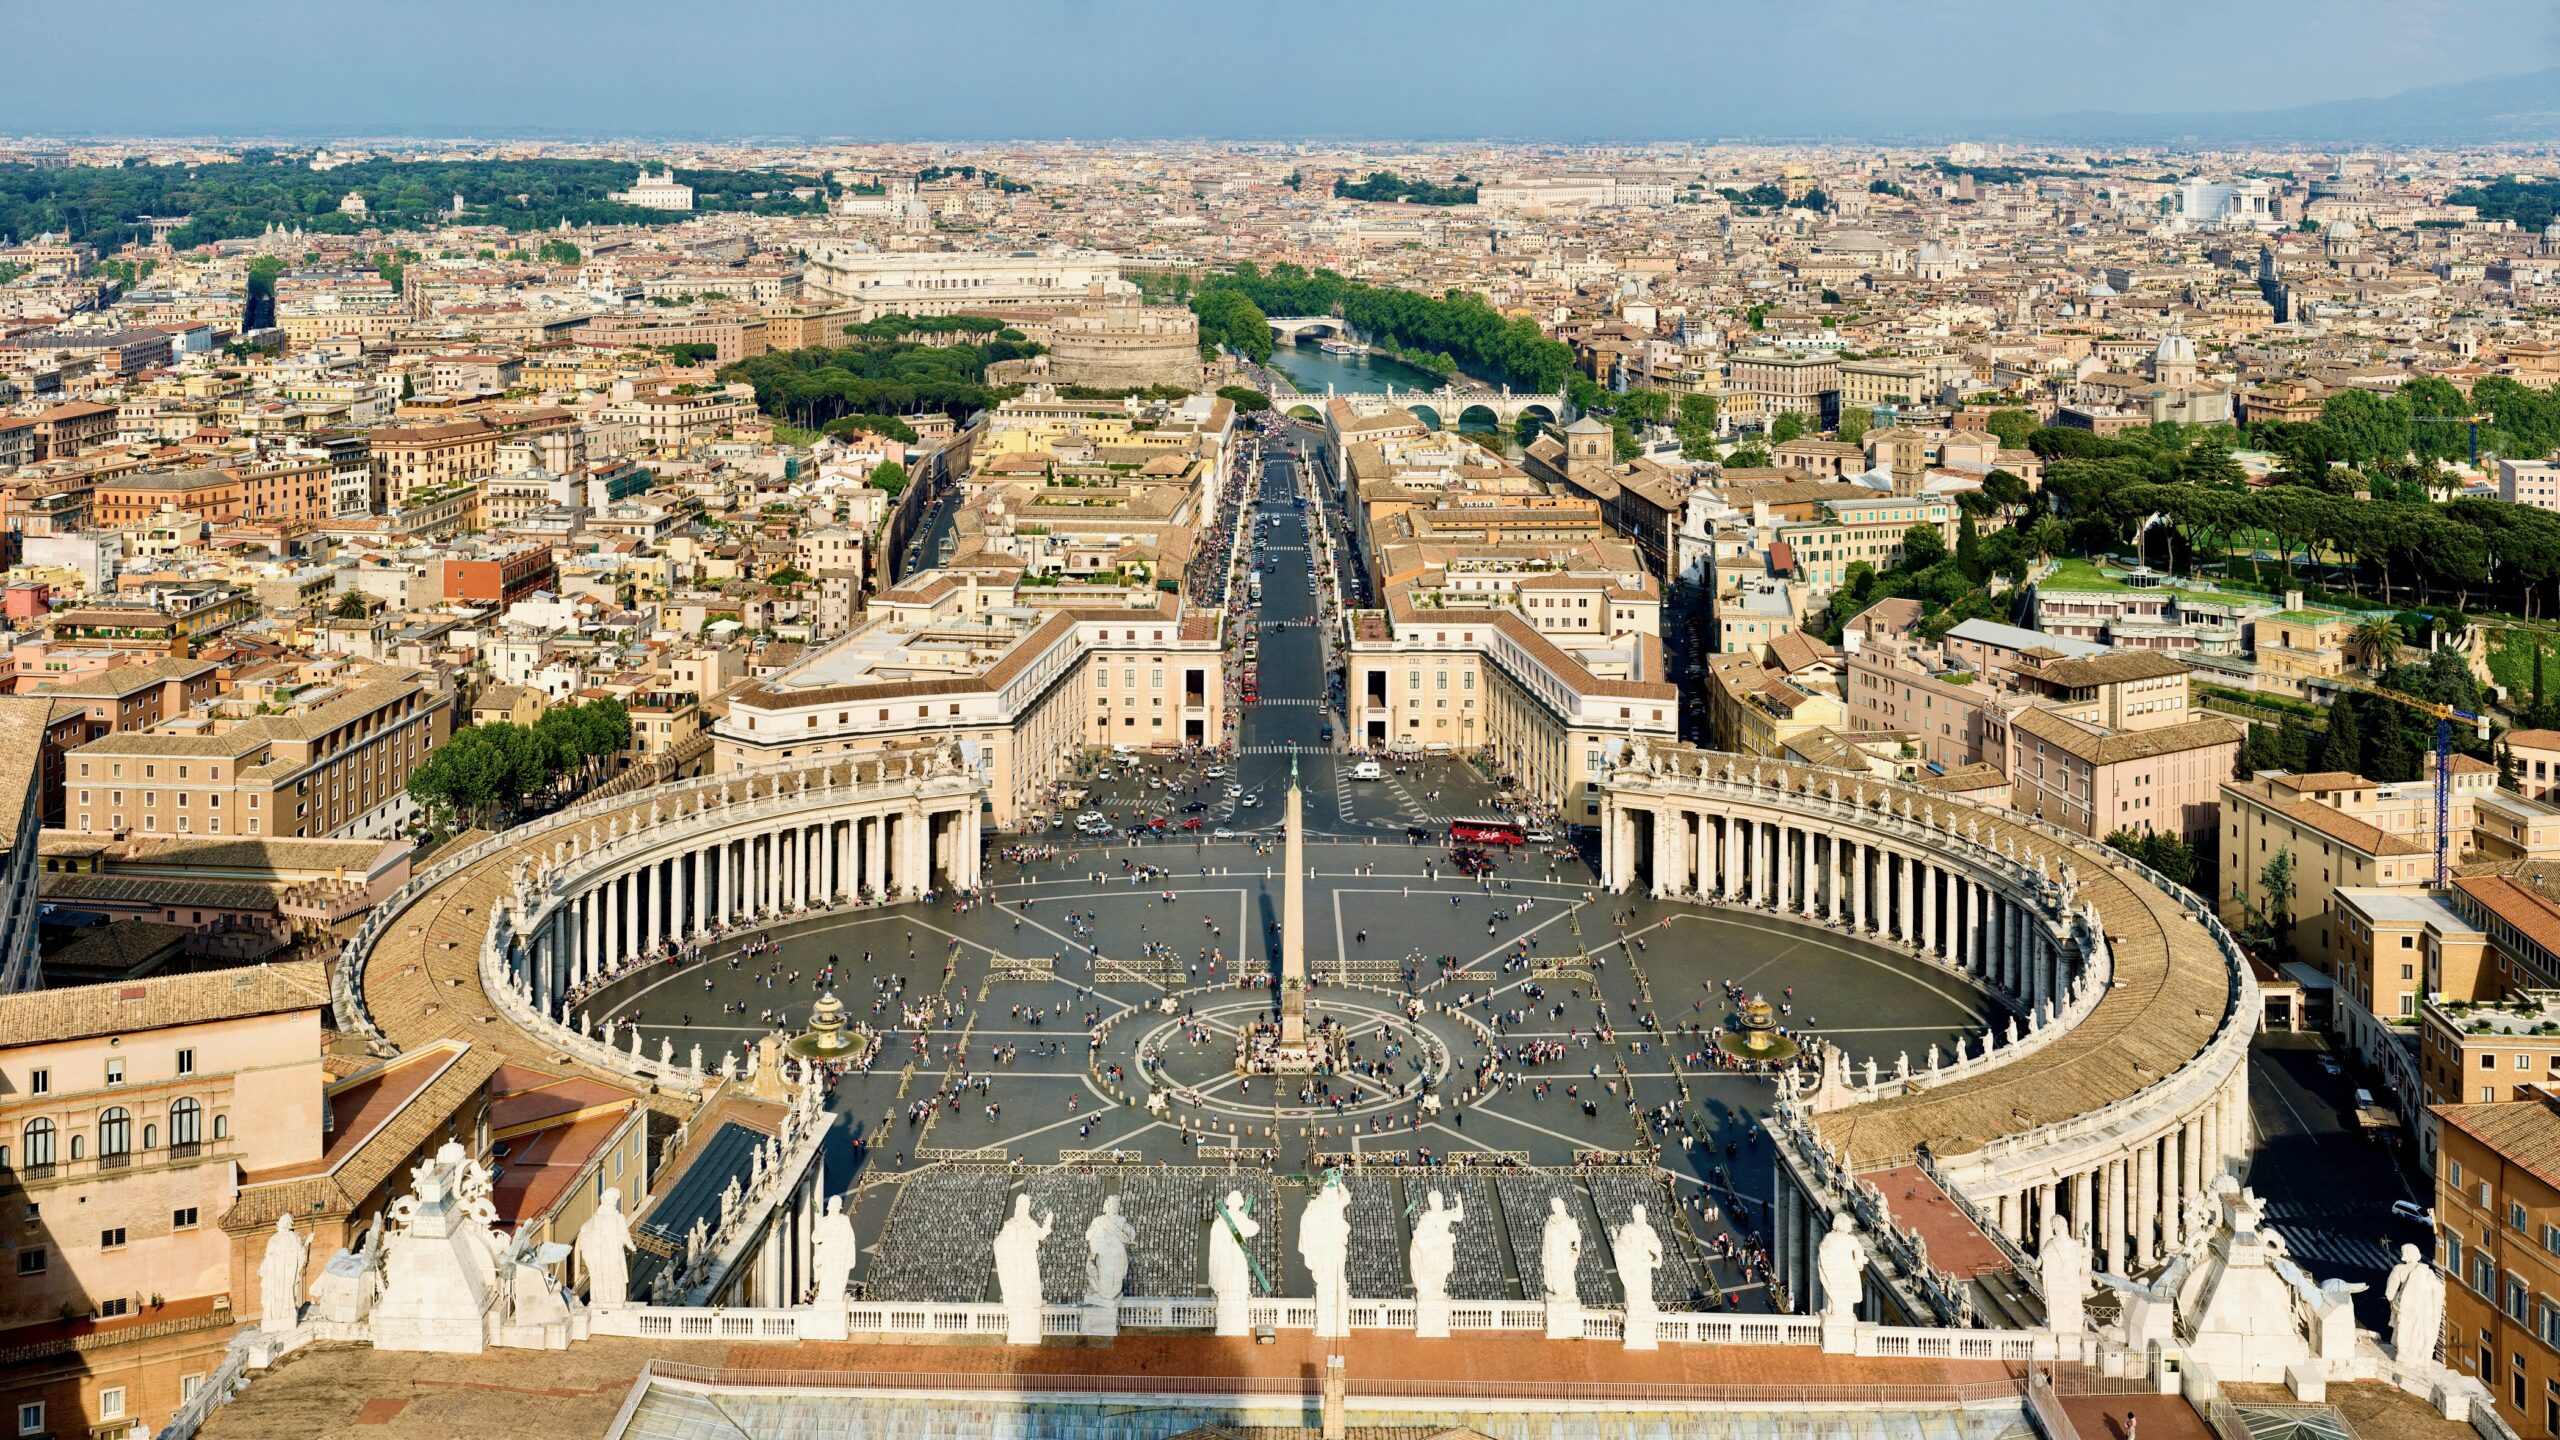 a photo from the top of the dome of st peter looking into the square with rome expanding into the distance Photo by DAVID ILIFF. License: CC BY-SA 3.0